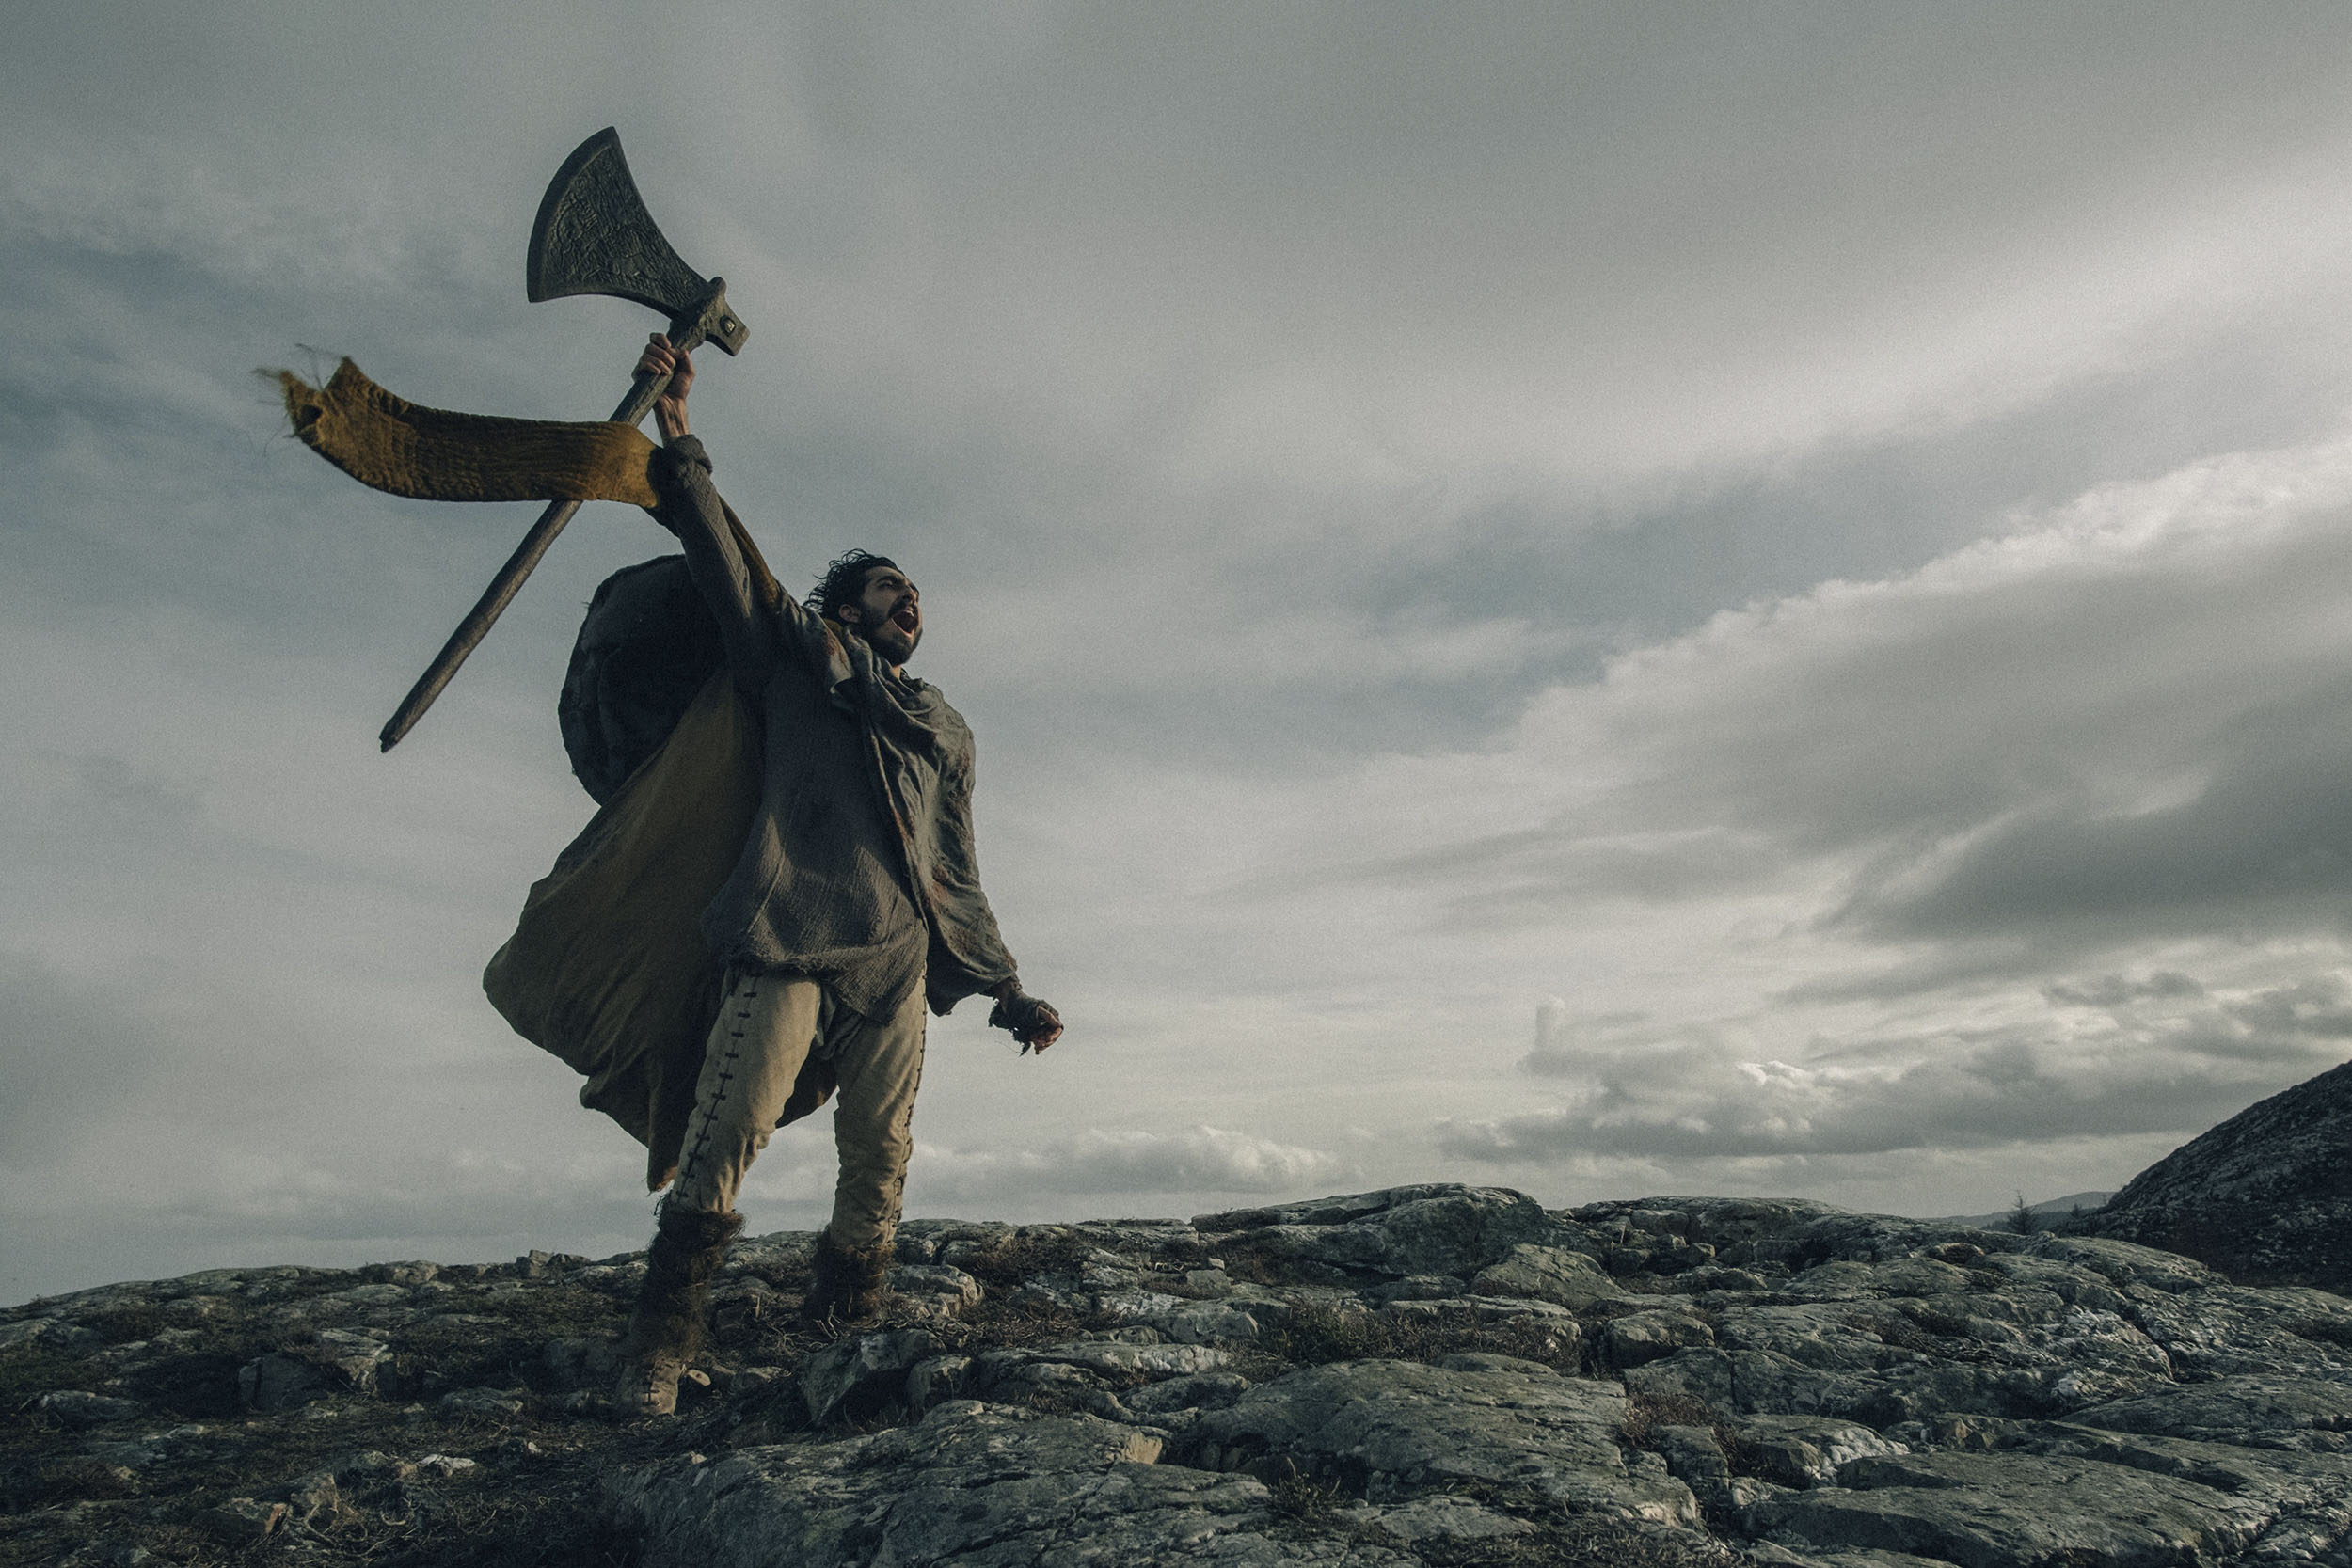 Dev Patel playing Gawain holds a huge axe in the air while he screams